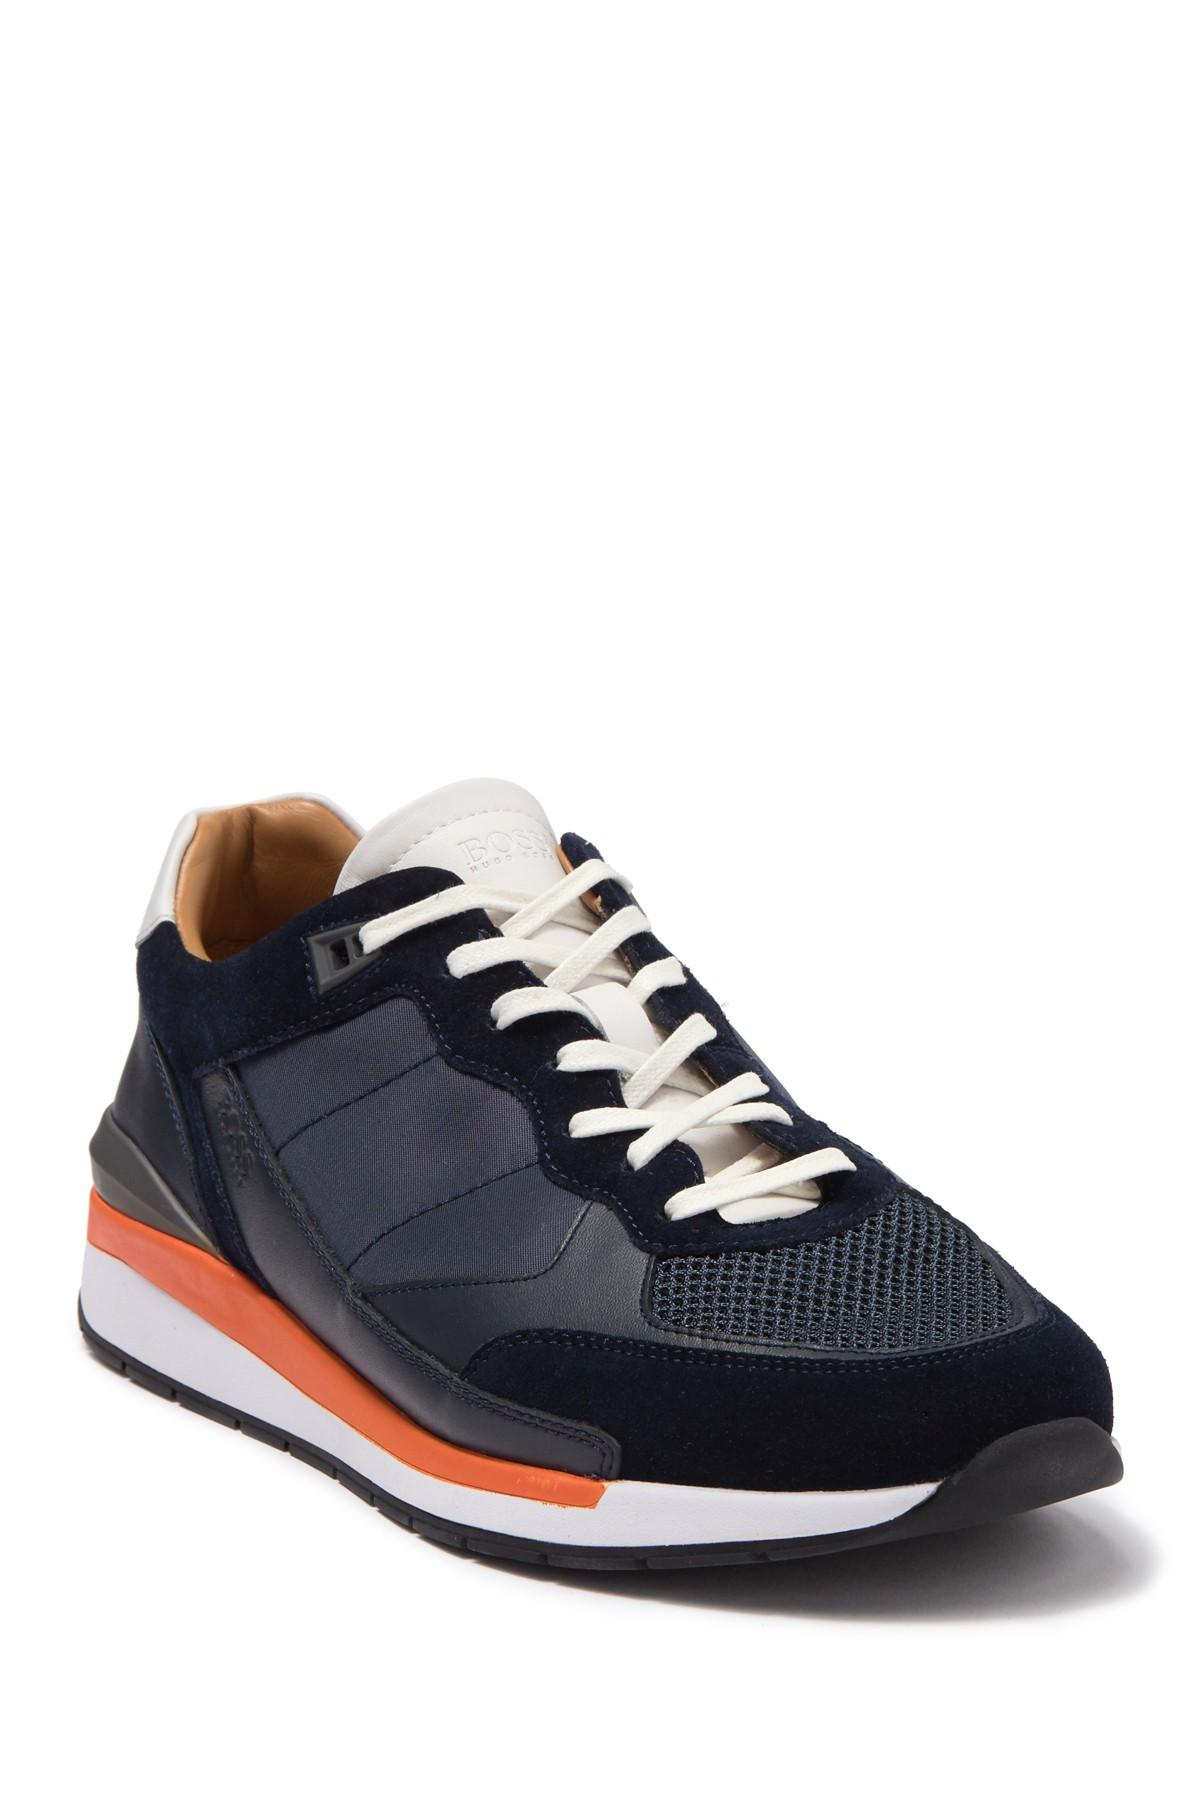 BOSS by Hugo Boss Leather Low-top Sneakers With Hybrid Uppers And Mesh ...